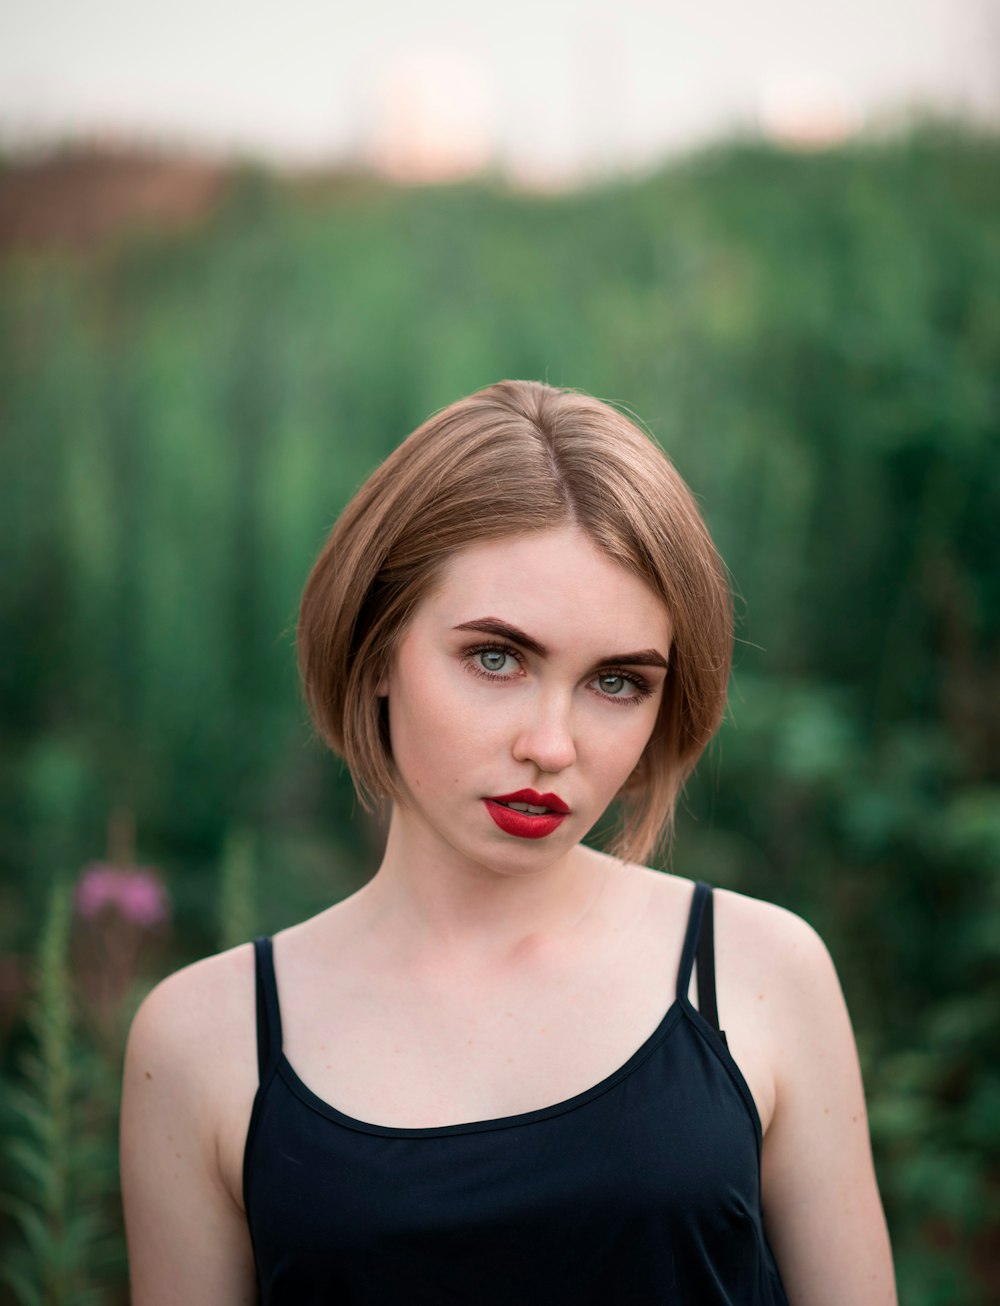 a woman with red lipstick and a black top